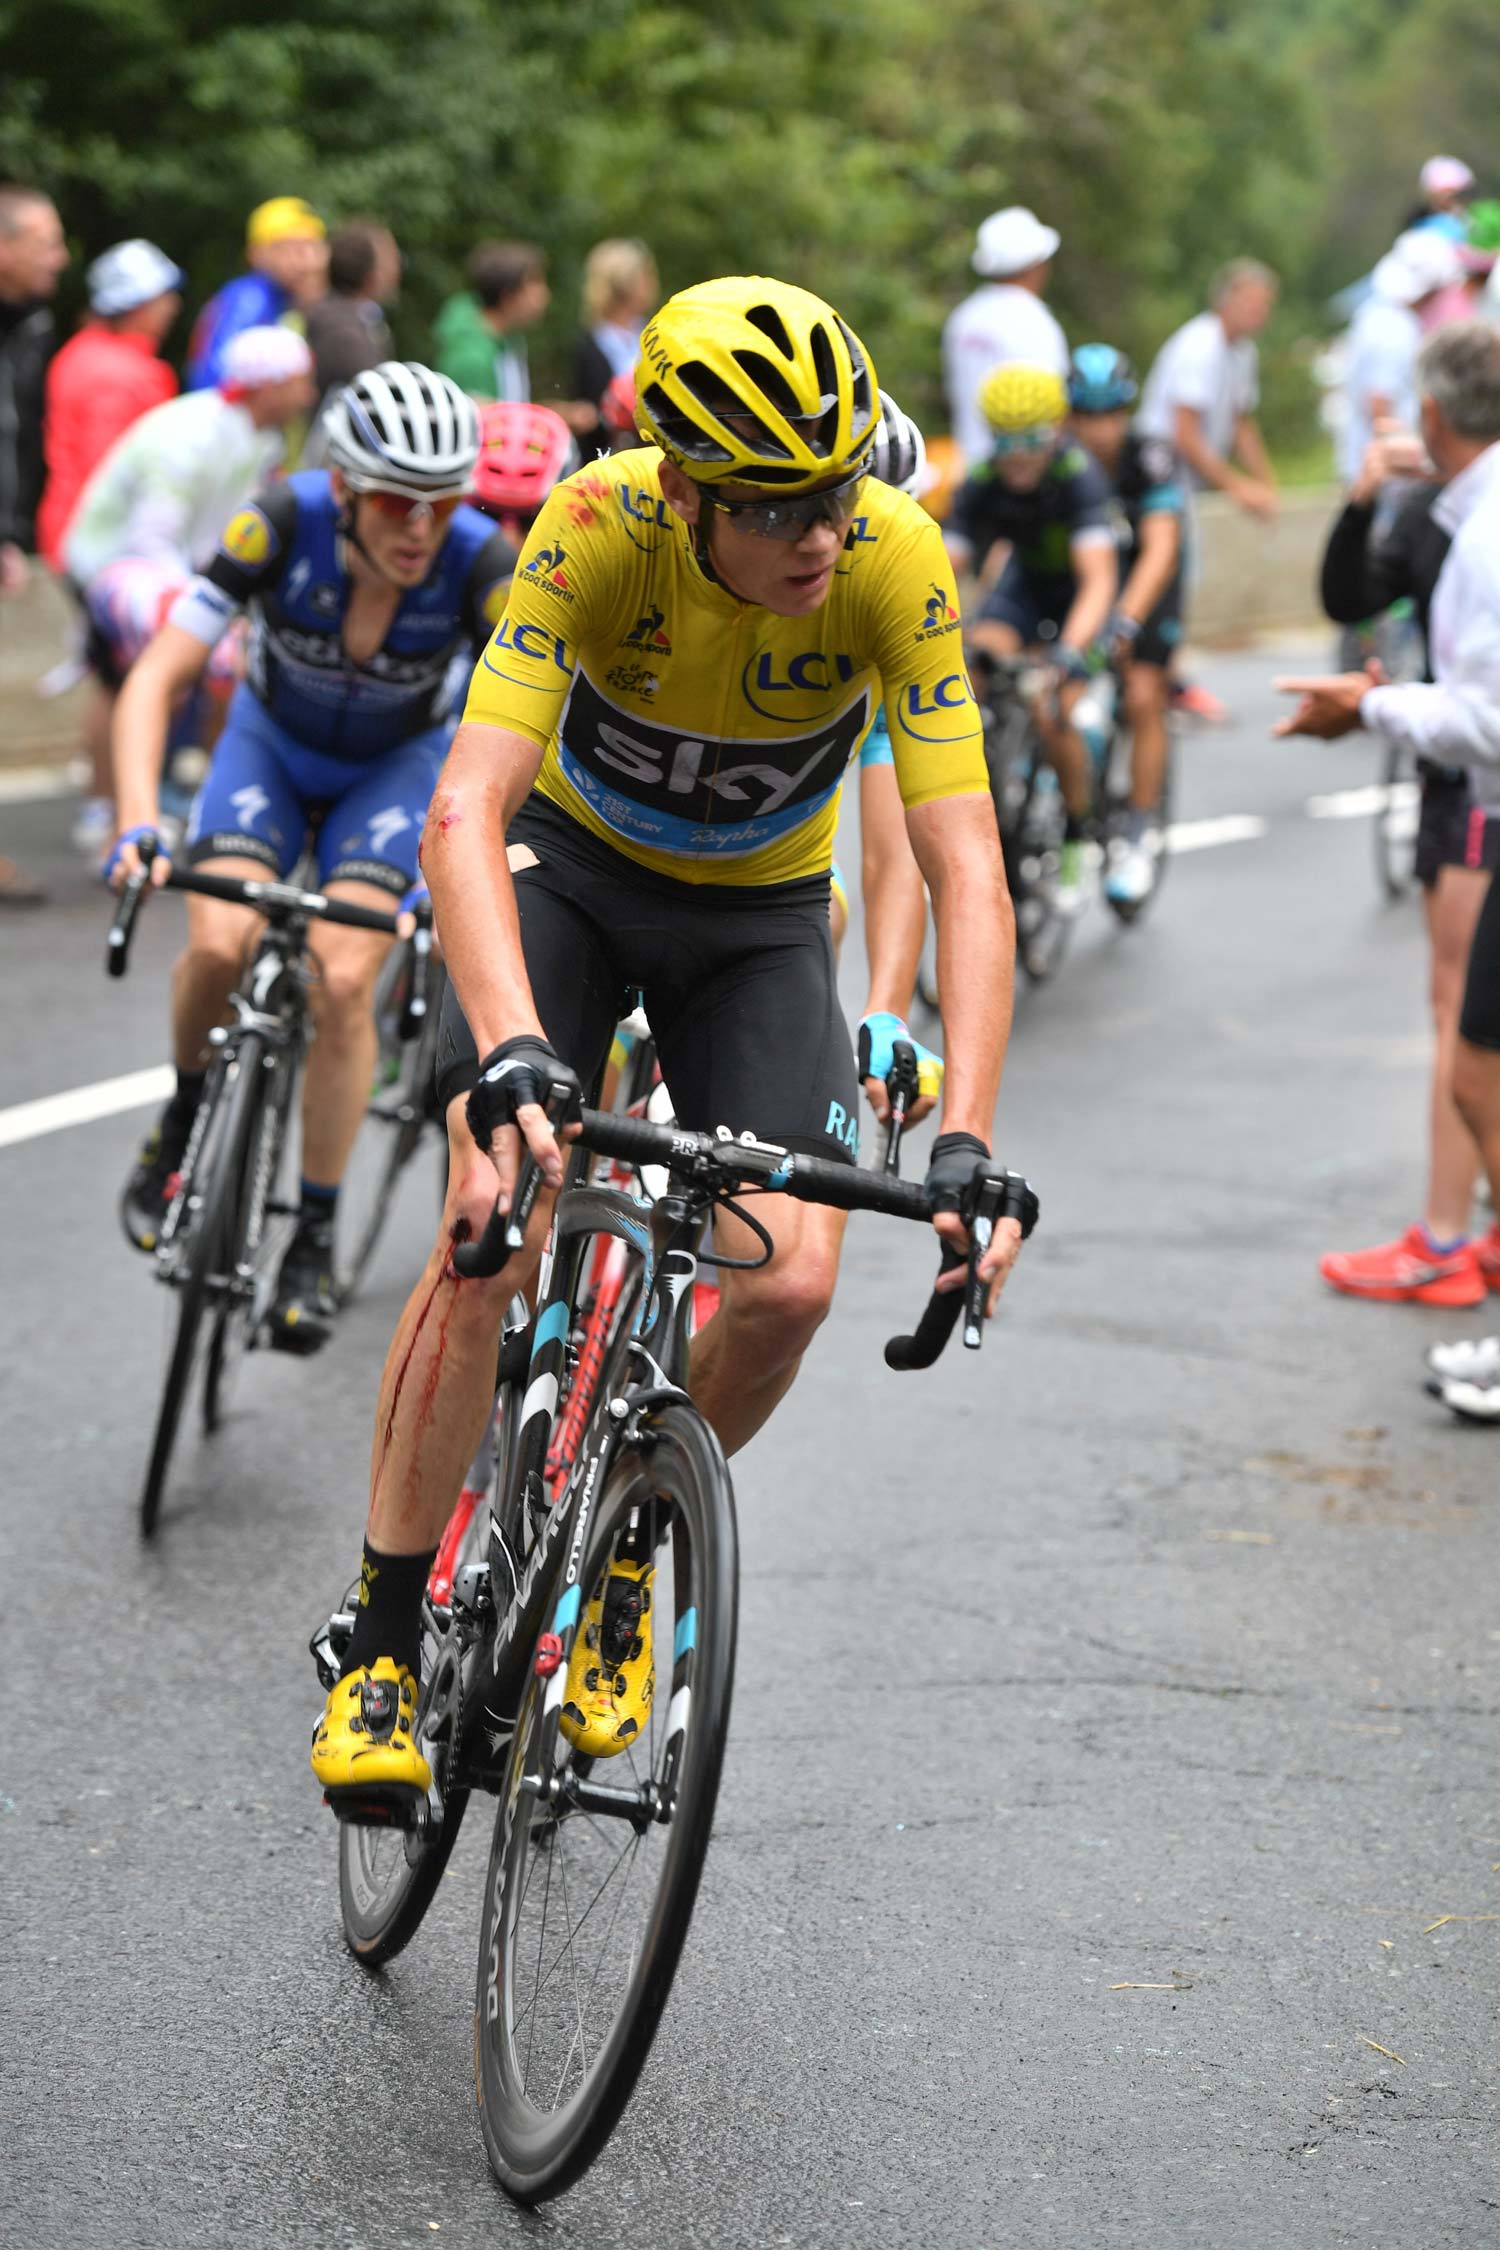 Even the race leader crashed heavily in stage 19 – but he quickly took a bike from team-mate Geraint Thomas and made it to the finish safely. Photo: Graham Watson